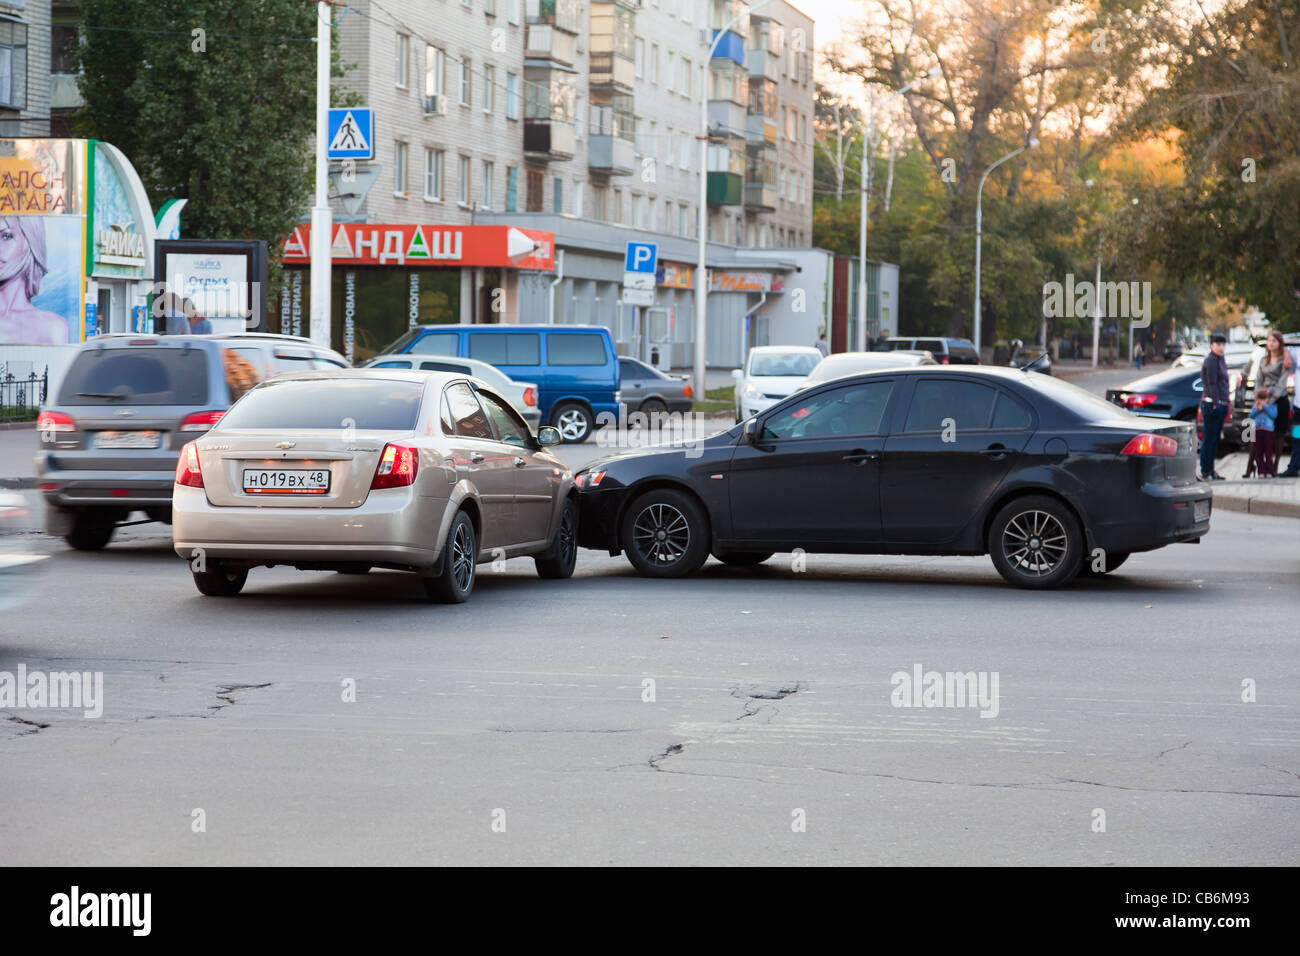 Car accident on the road, two vehicles collided, drivers looking at damage. Lipetsk, Russia Stock Photo